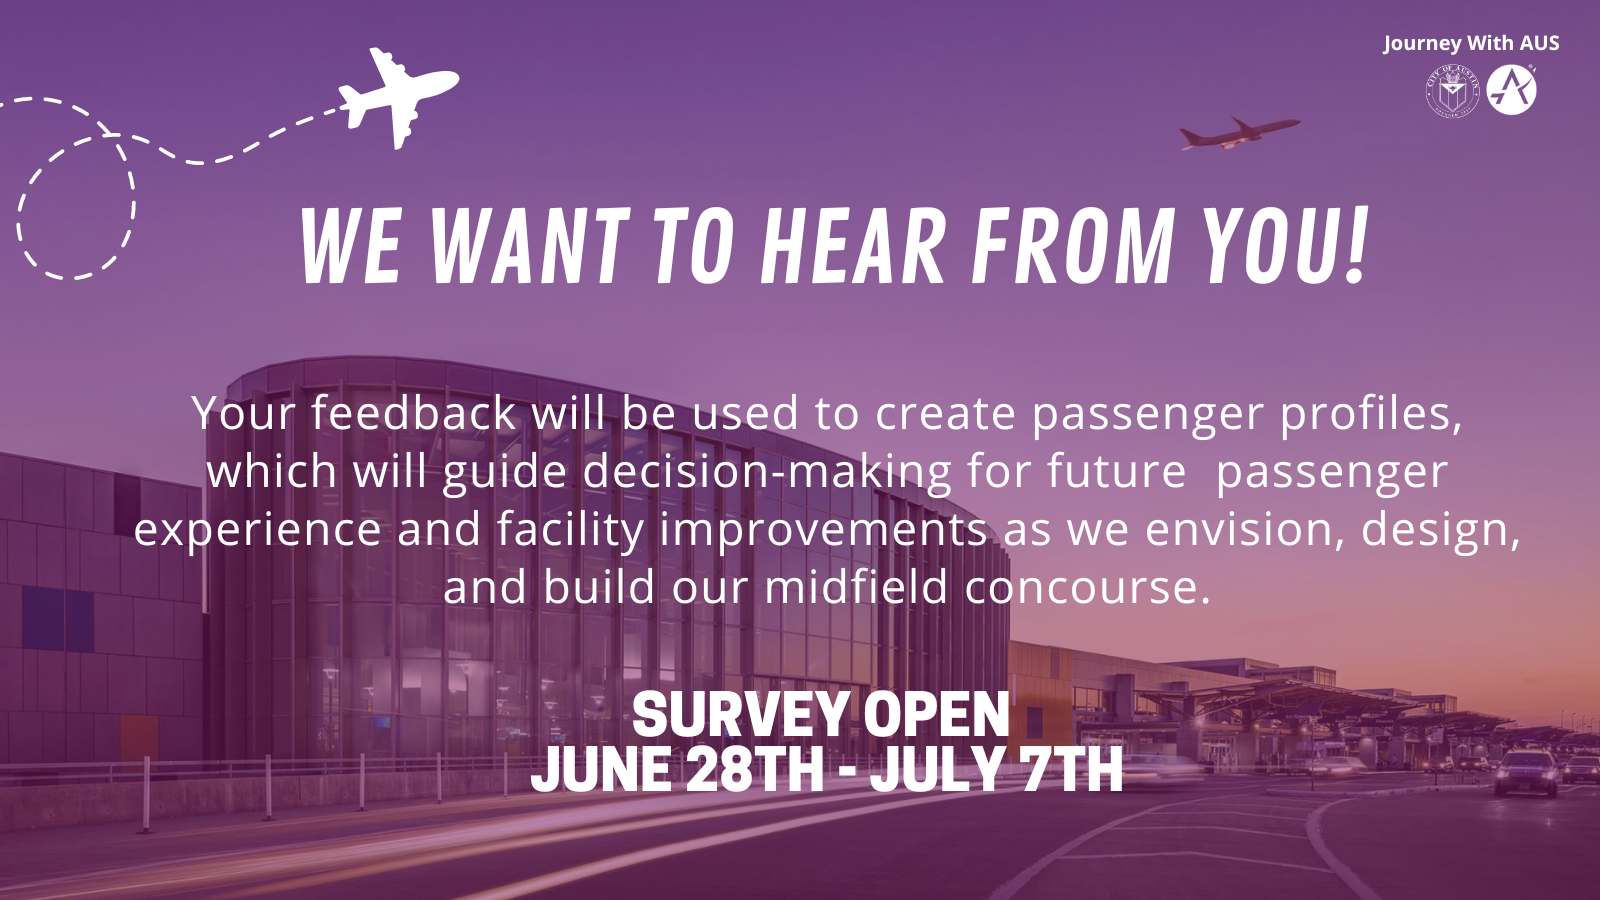 A graphic with text that reads "We want to hear from you. Your feedback will be used to create passenger profiles, which will guide decision-making for future  passenger experience and facility improvements as we envision, design, and build our midfield concourse.